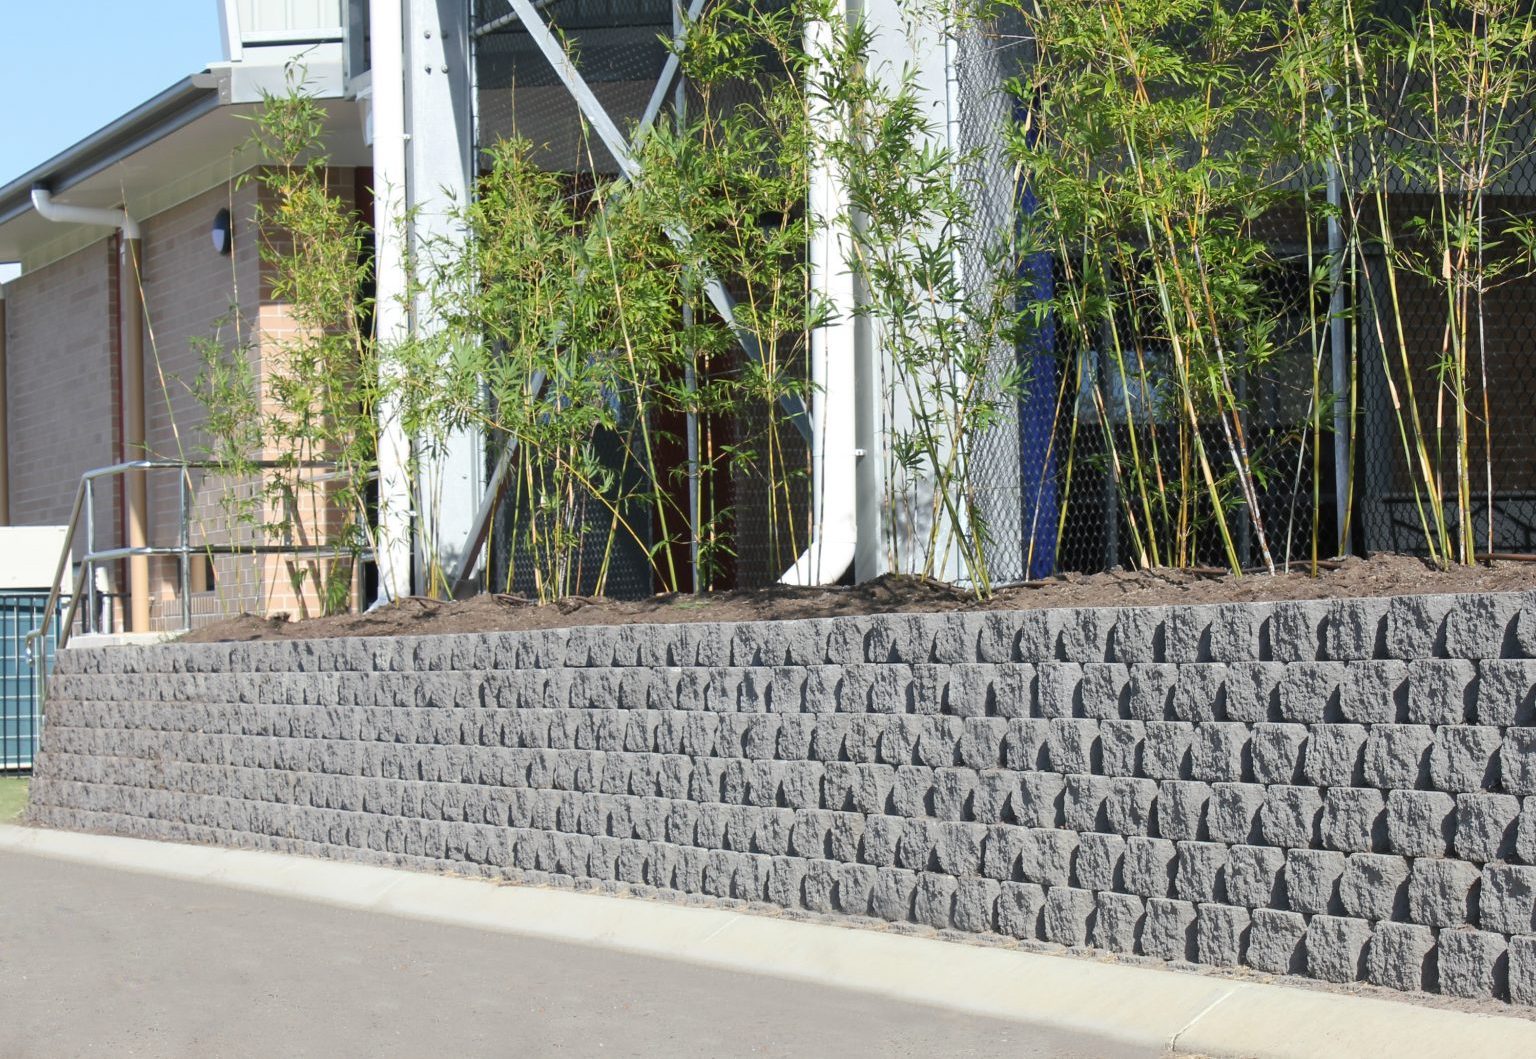 High_drystack_charcoal_retaining_wall_supporting_a_garden_bed_in_front_of_tennis_courts_at_a_school